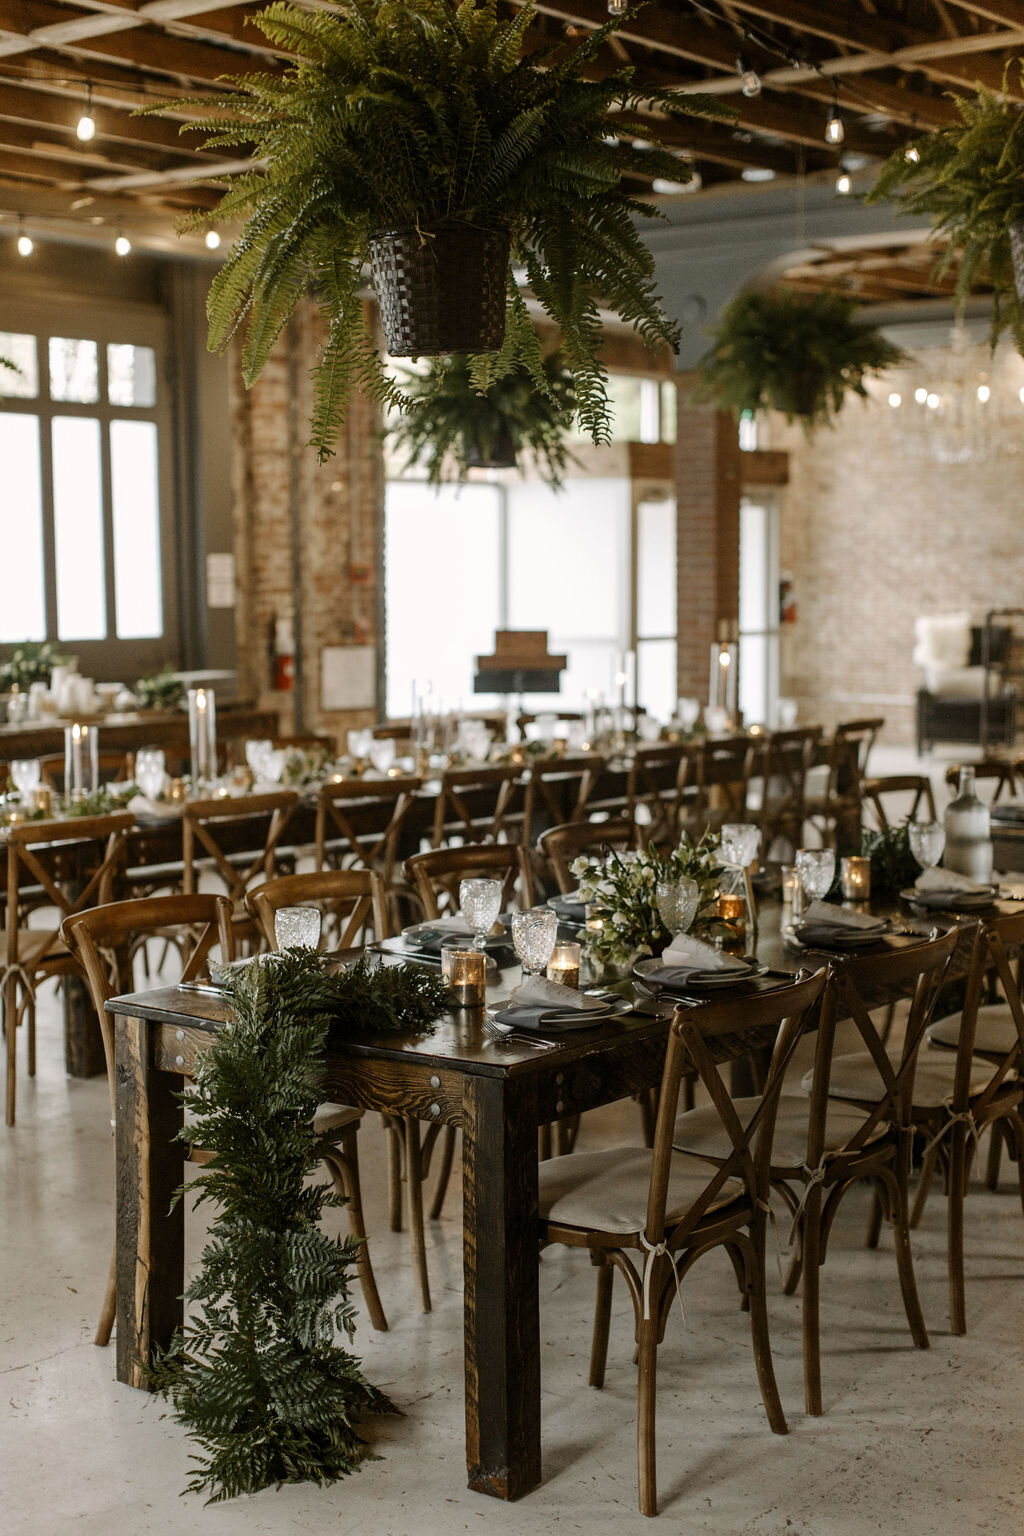 Romantic wedding reception at the St Vrain with candles and greenery